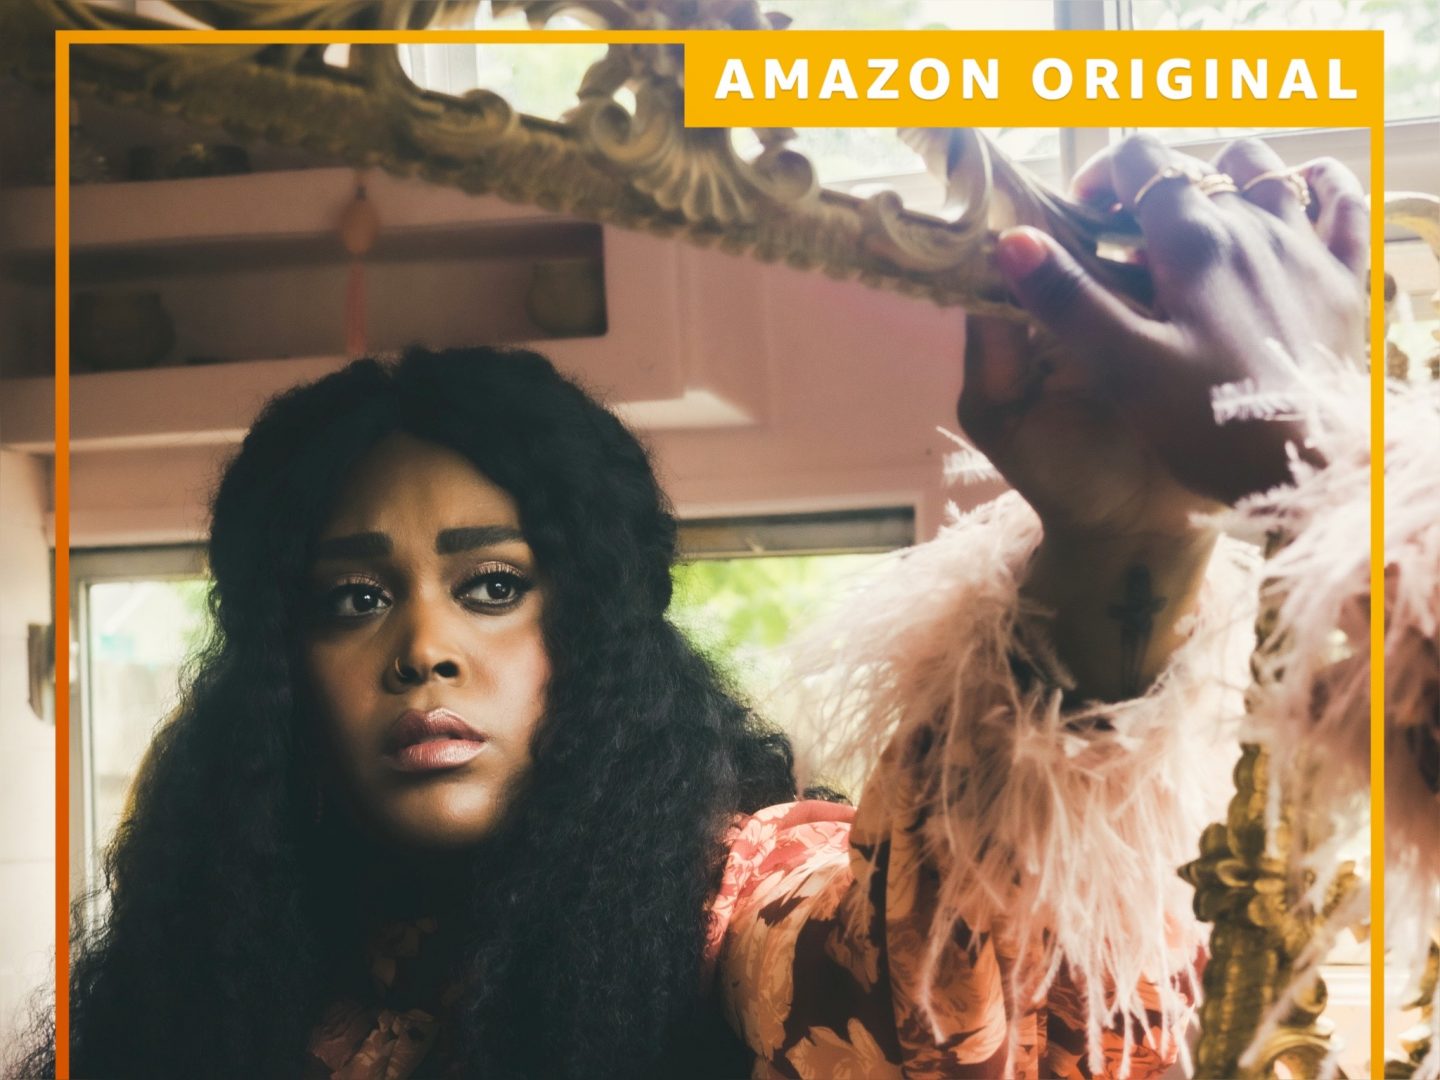 Amazon Music releases new video by groundbreaking artist Brittney Spencer